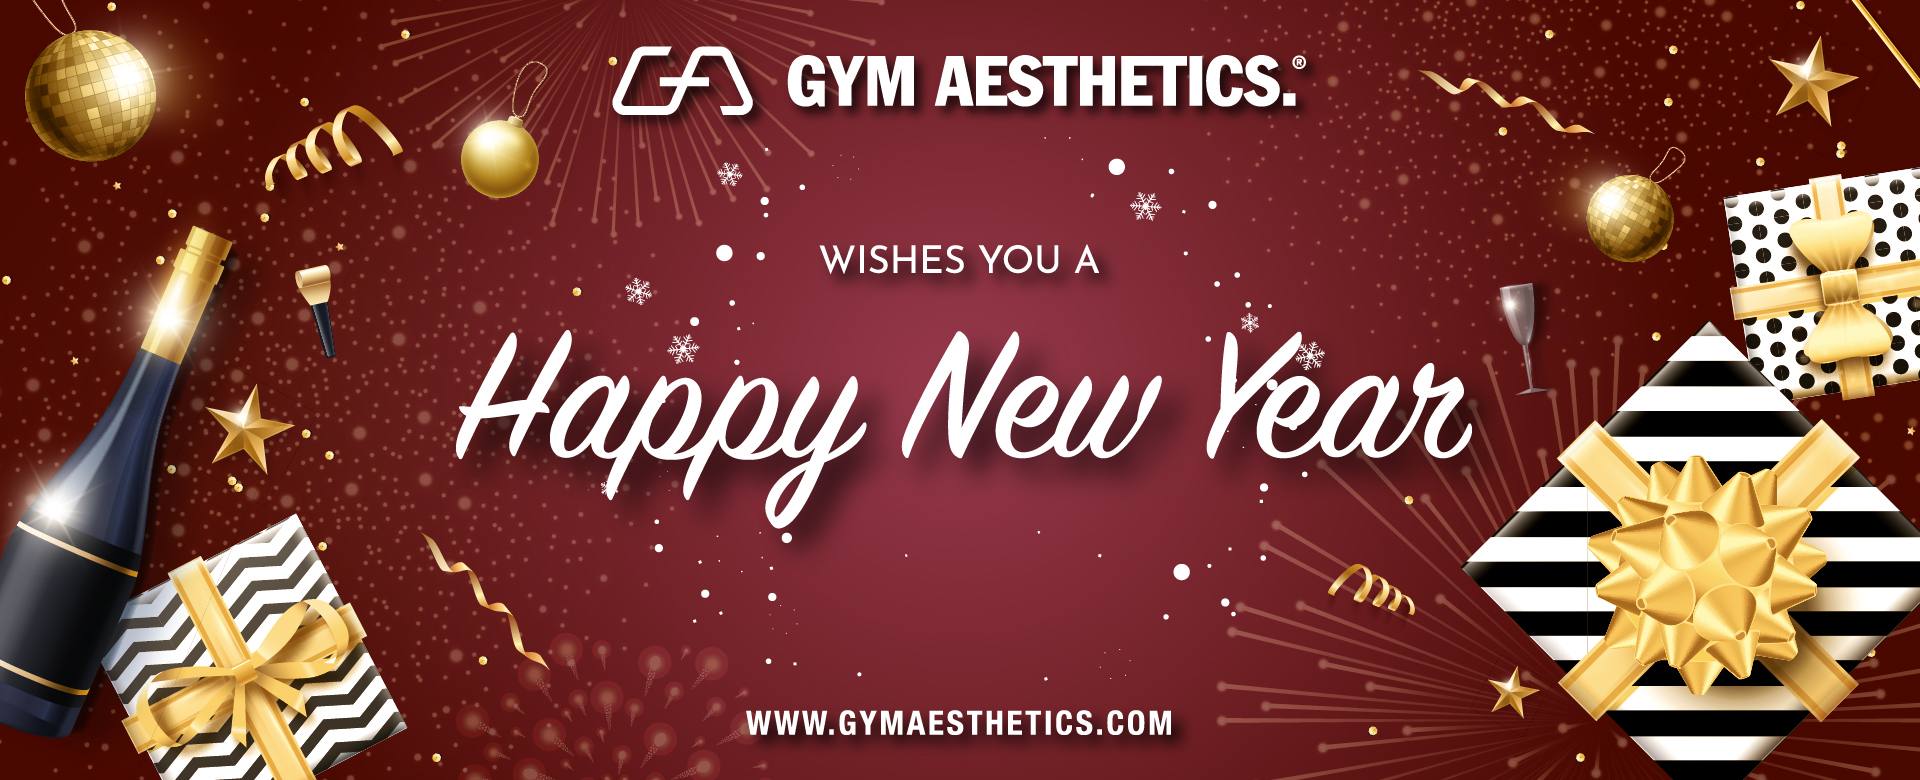 Happy New Year - Gift for him or her - buy 3 get 1 free | Gym Aesthetics